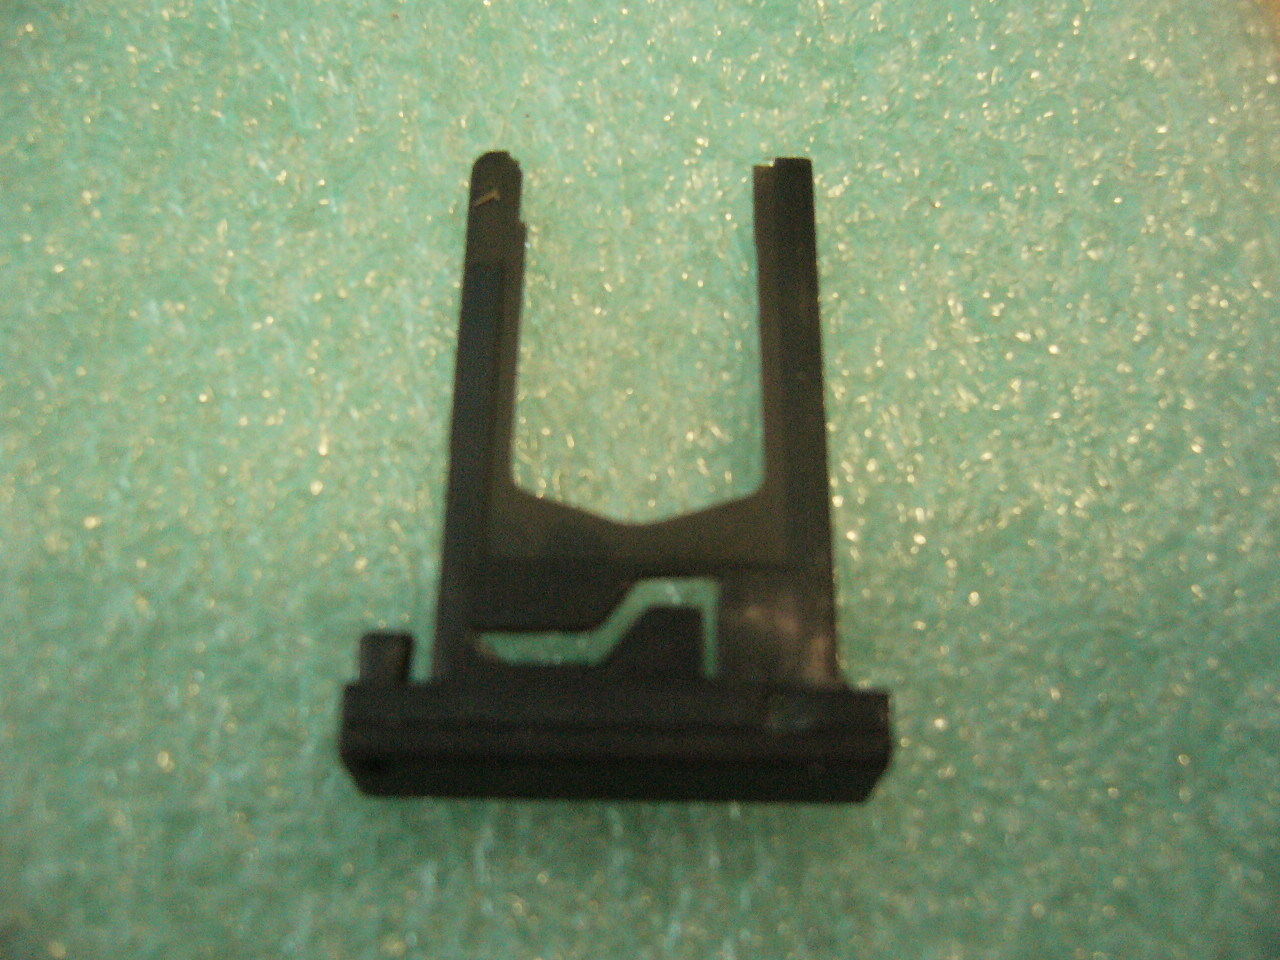 QTY 1x SIM card Tray or Holder for Lenovo Thinkpad T440 T440s T450 T450s T460 - Click Image to Close